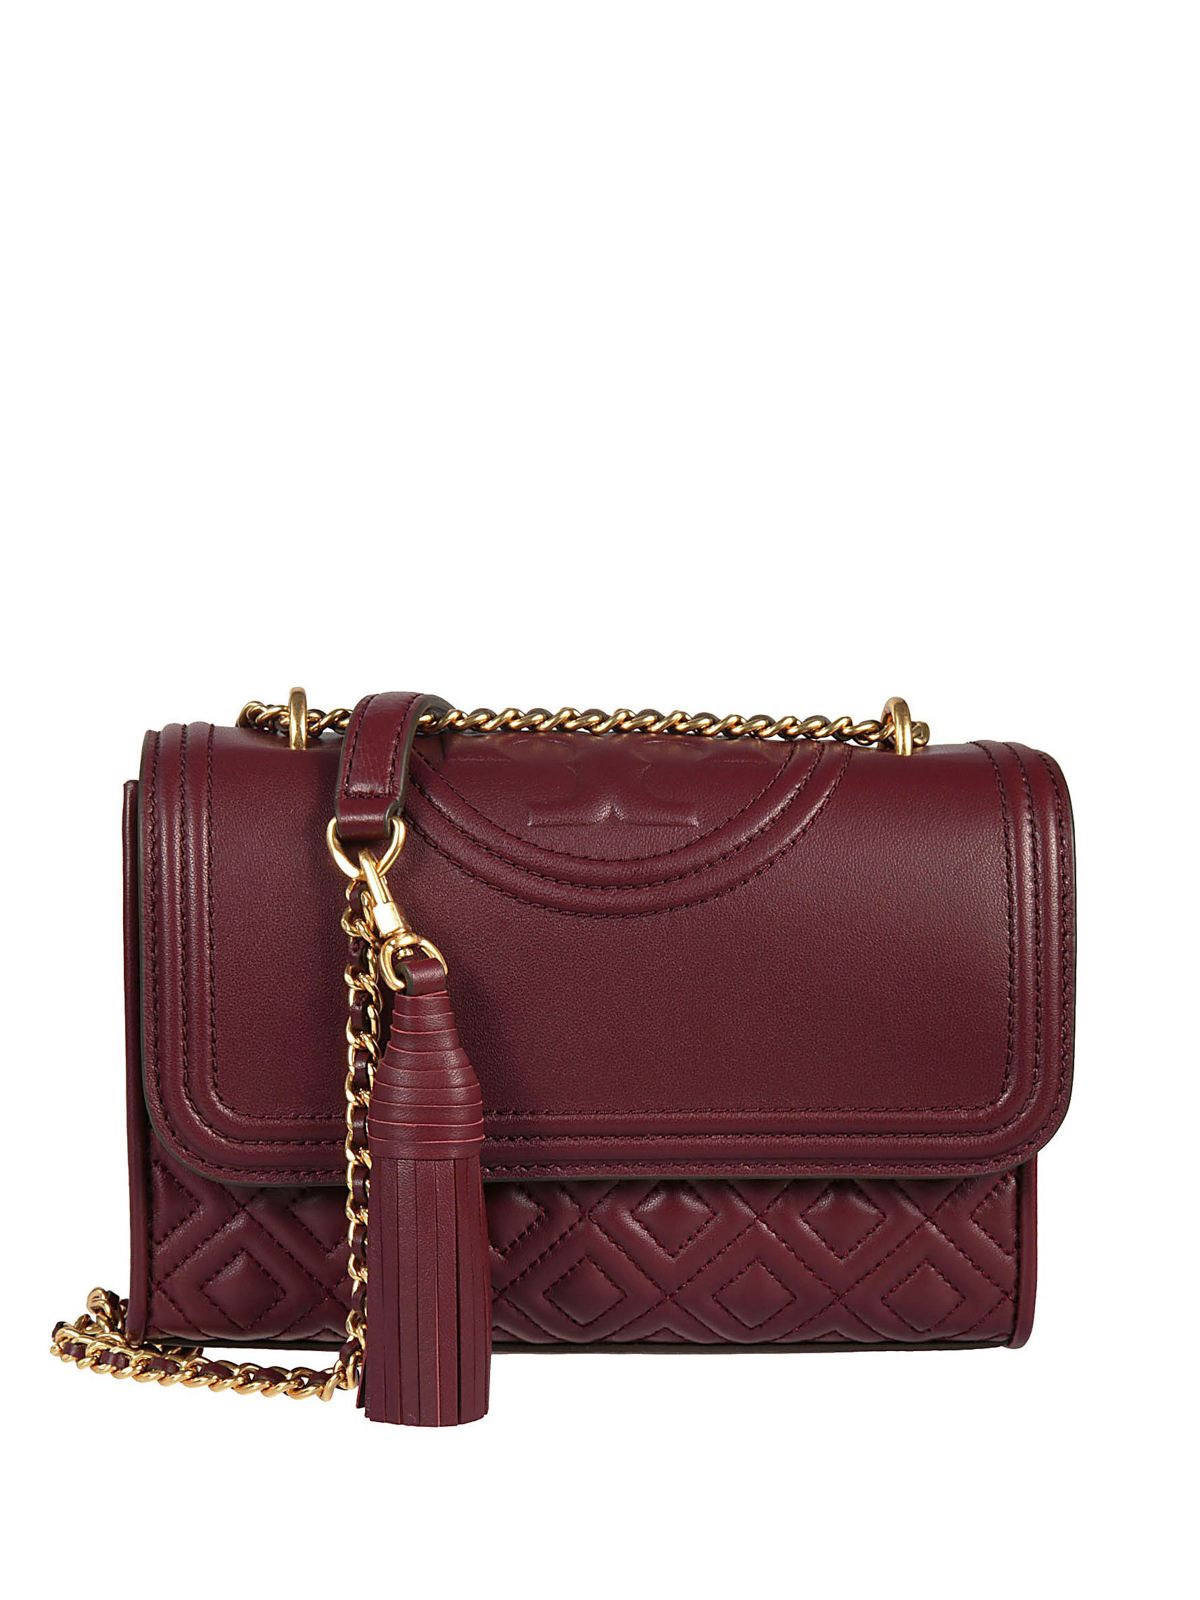 Shoulder bags Tory Burch - Fleming small burgundy quilted leather bag -  43834609